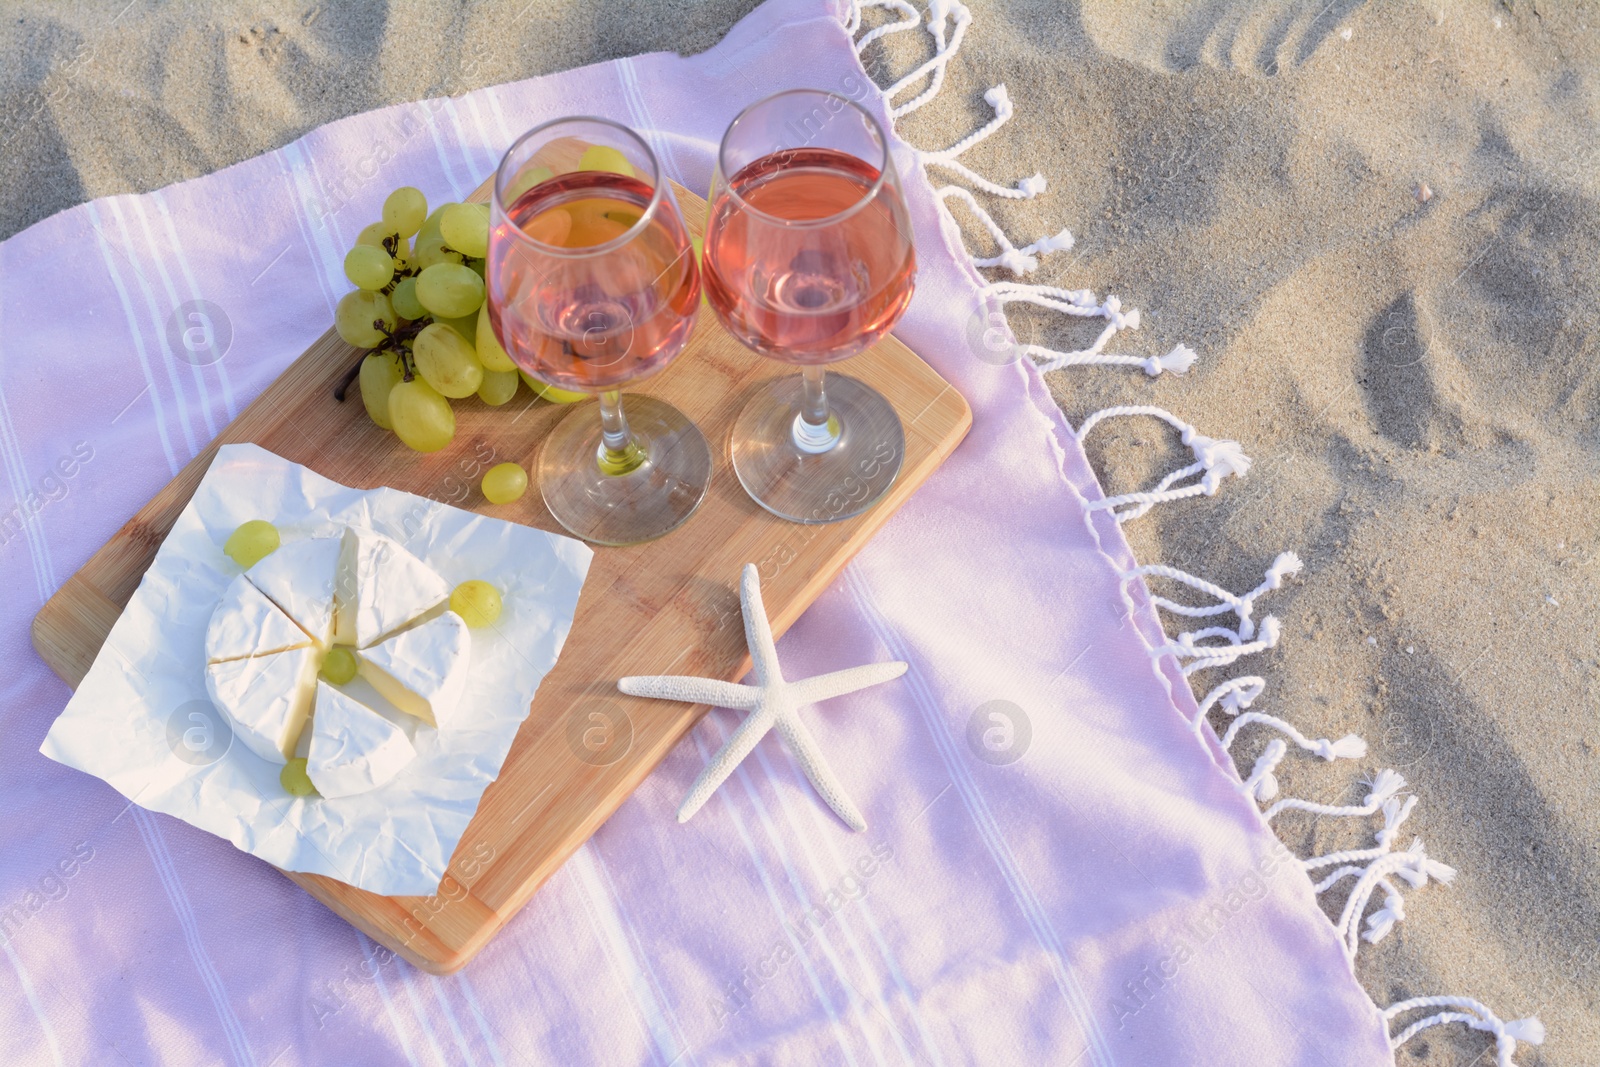 Photo of Glasses with rose wine and snacks for beach picnic on sand outdoors